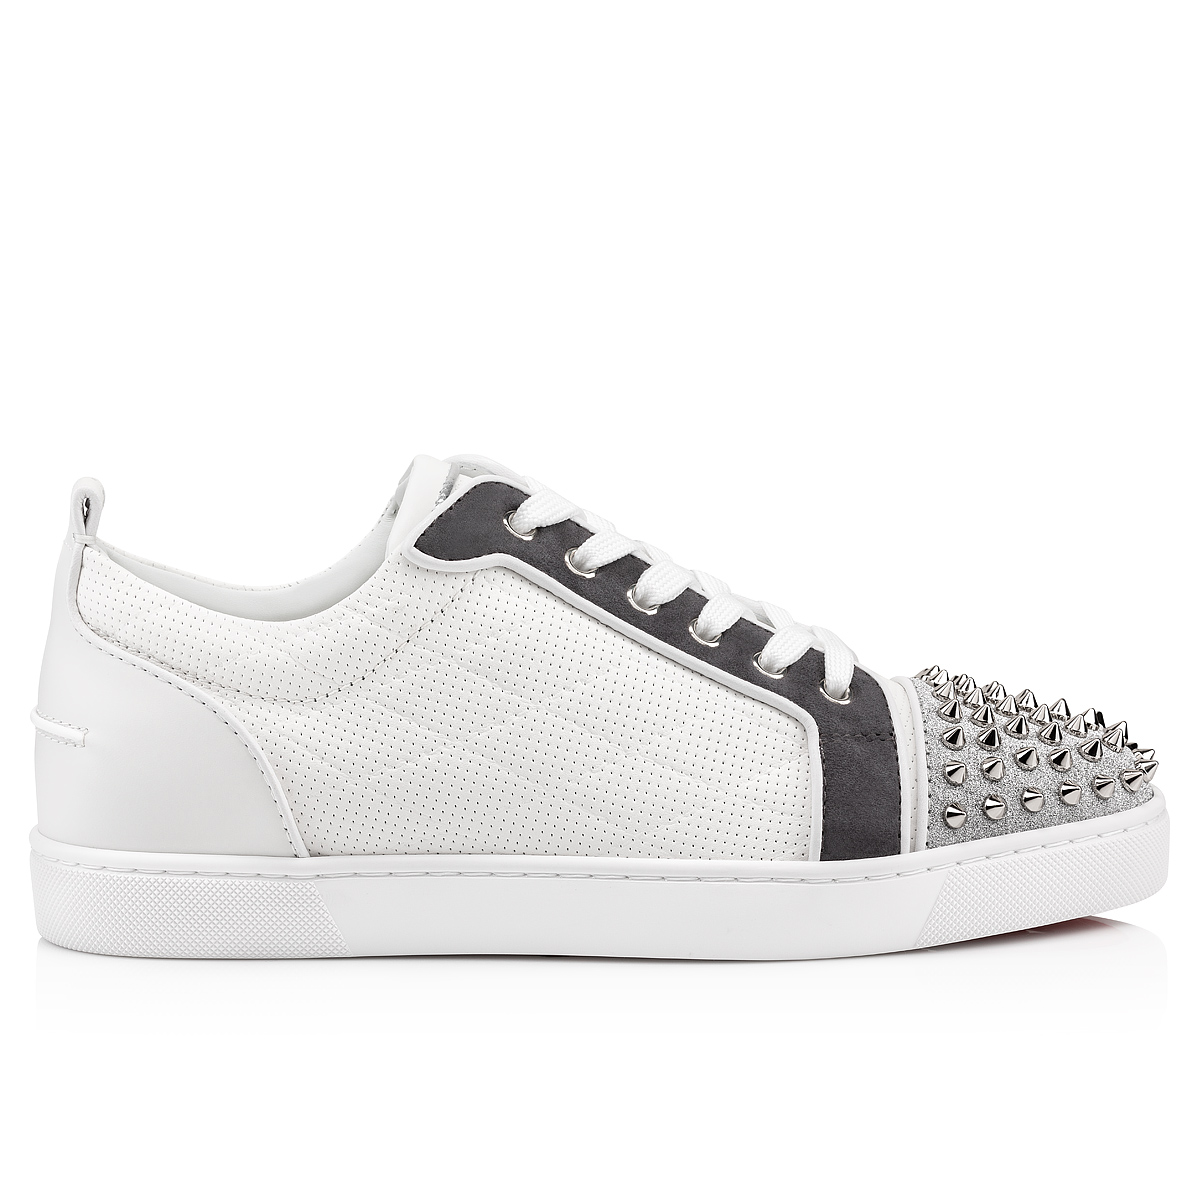 Christian Louboutin, Shoes, Christian Louboutin Louis Junior Glittered Suede  Leather Lowtop Sneakers 46